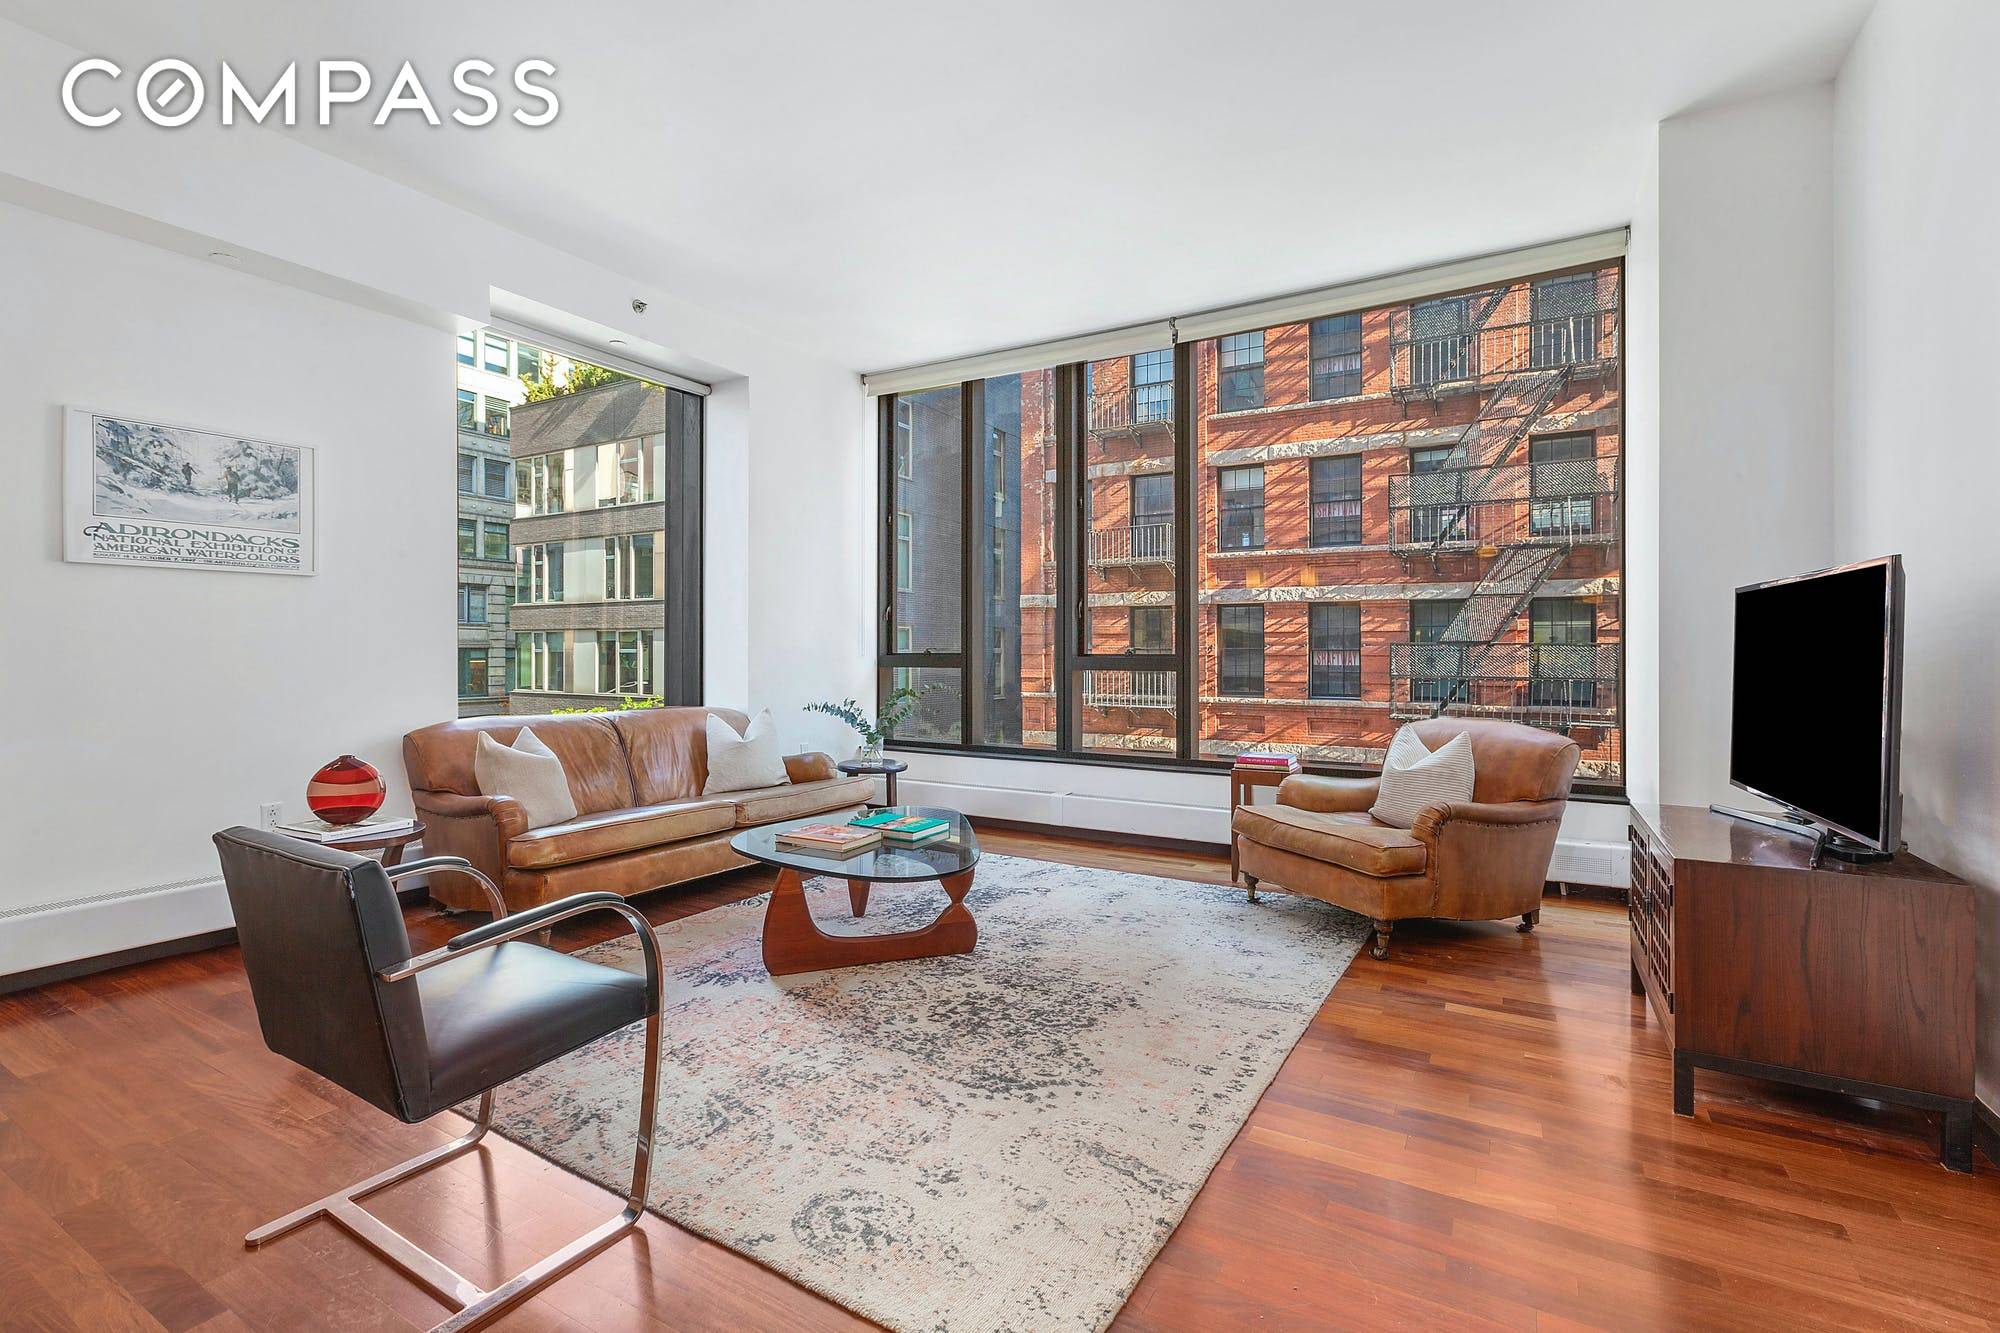 Motivated seller ! Apartment 4E is an inviting two bedroom condo with modern conveniences and low carrying costs in the heart of Hudson Square.